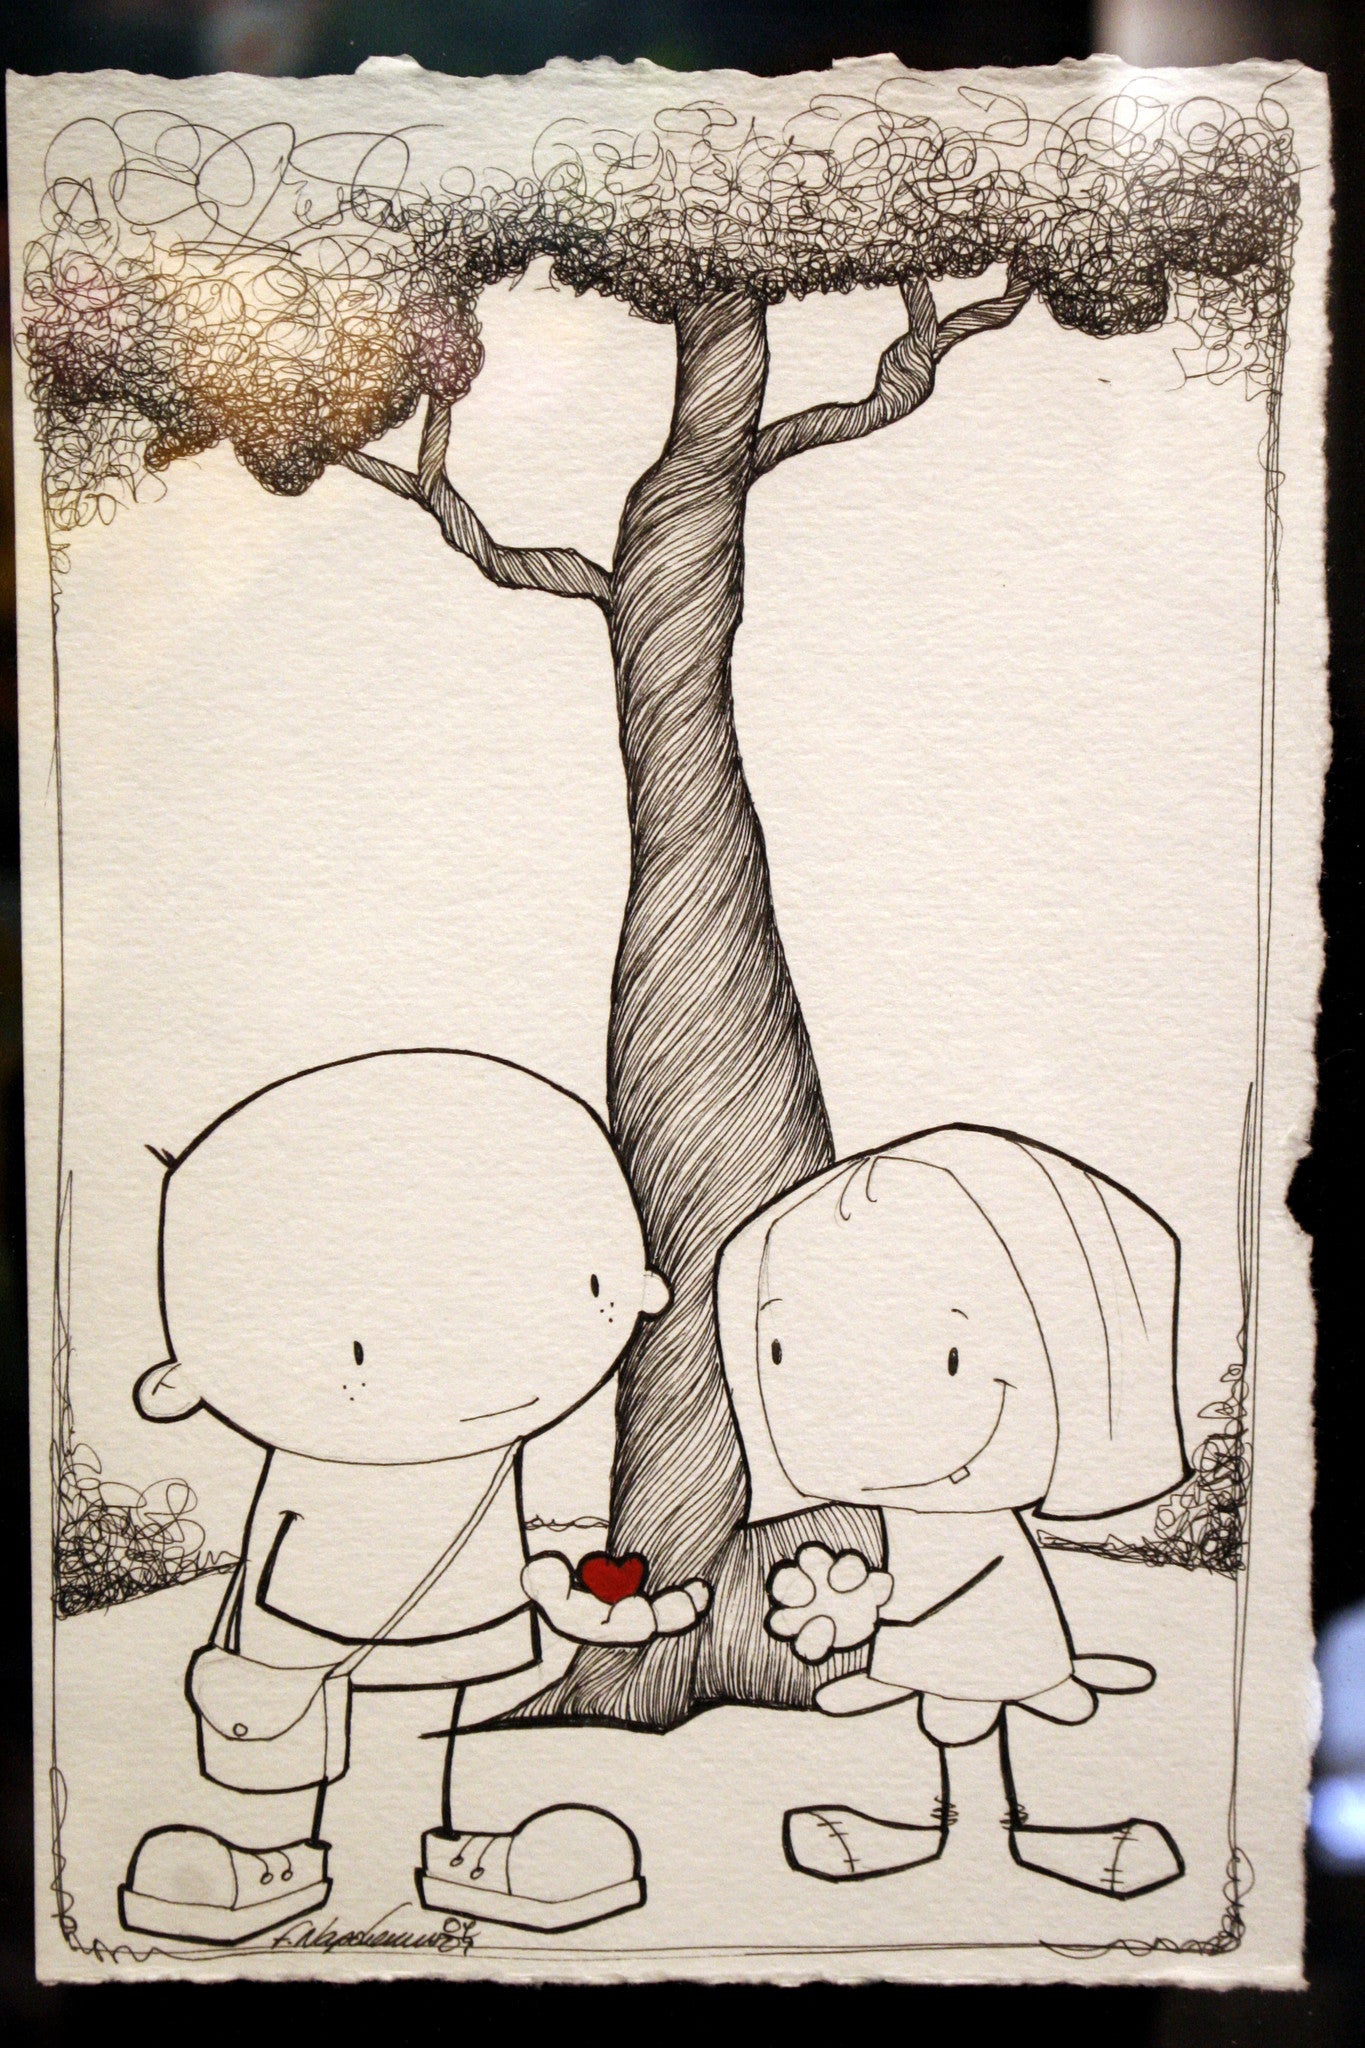 Fabio Napoleoni "What to Share This with You" Original Pen and Ink